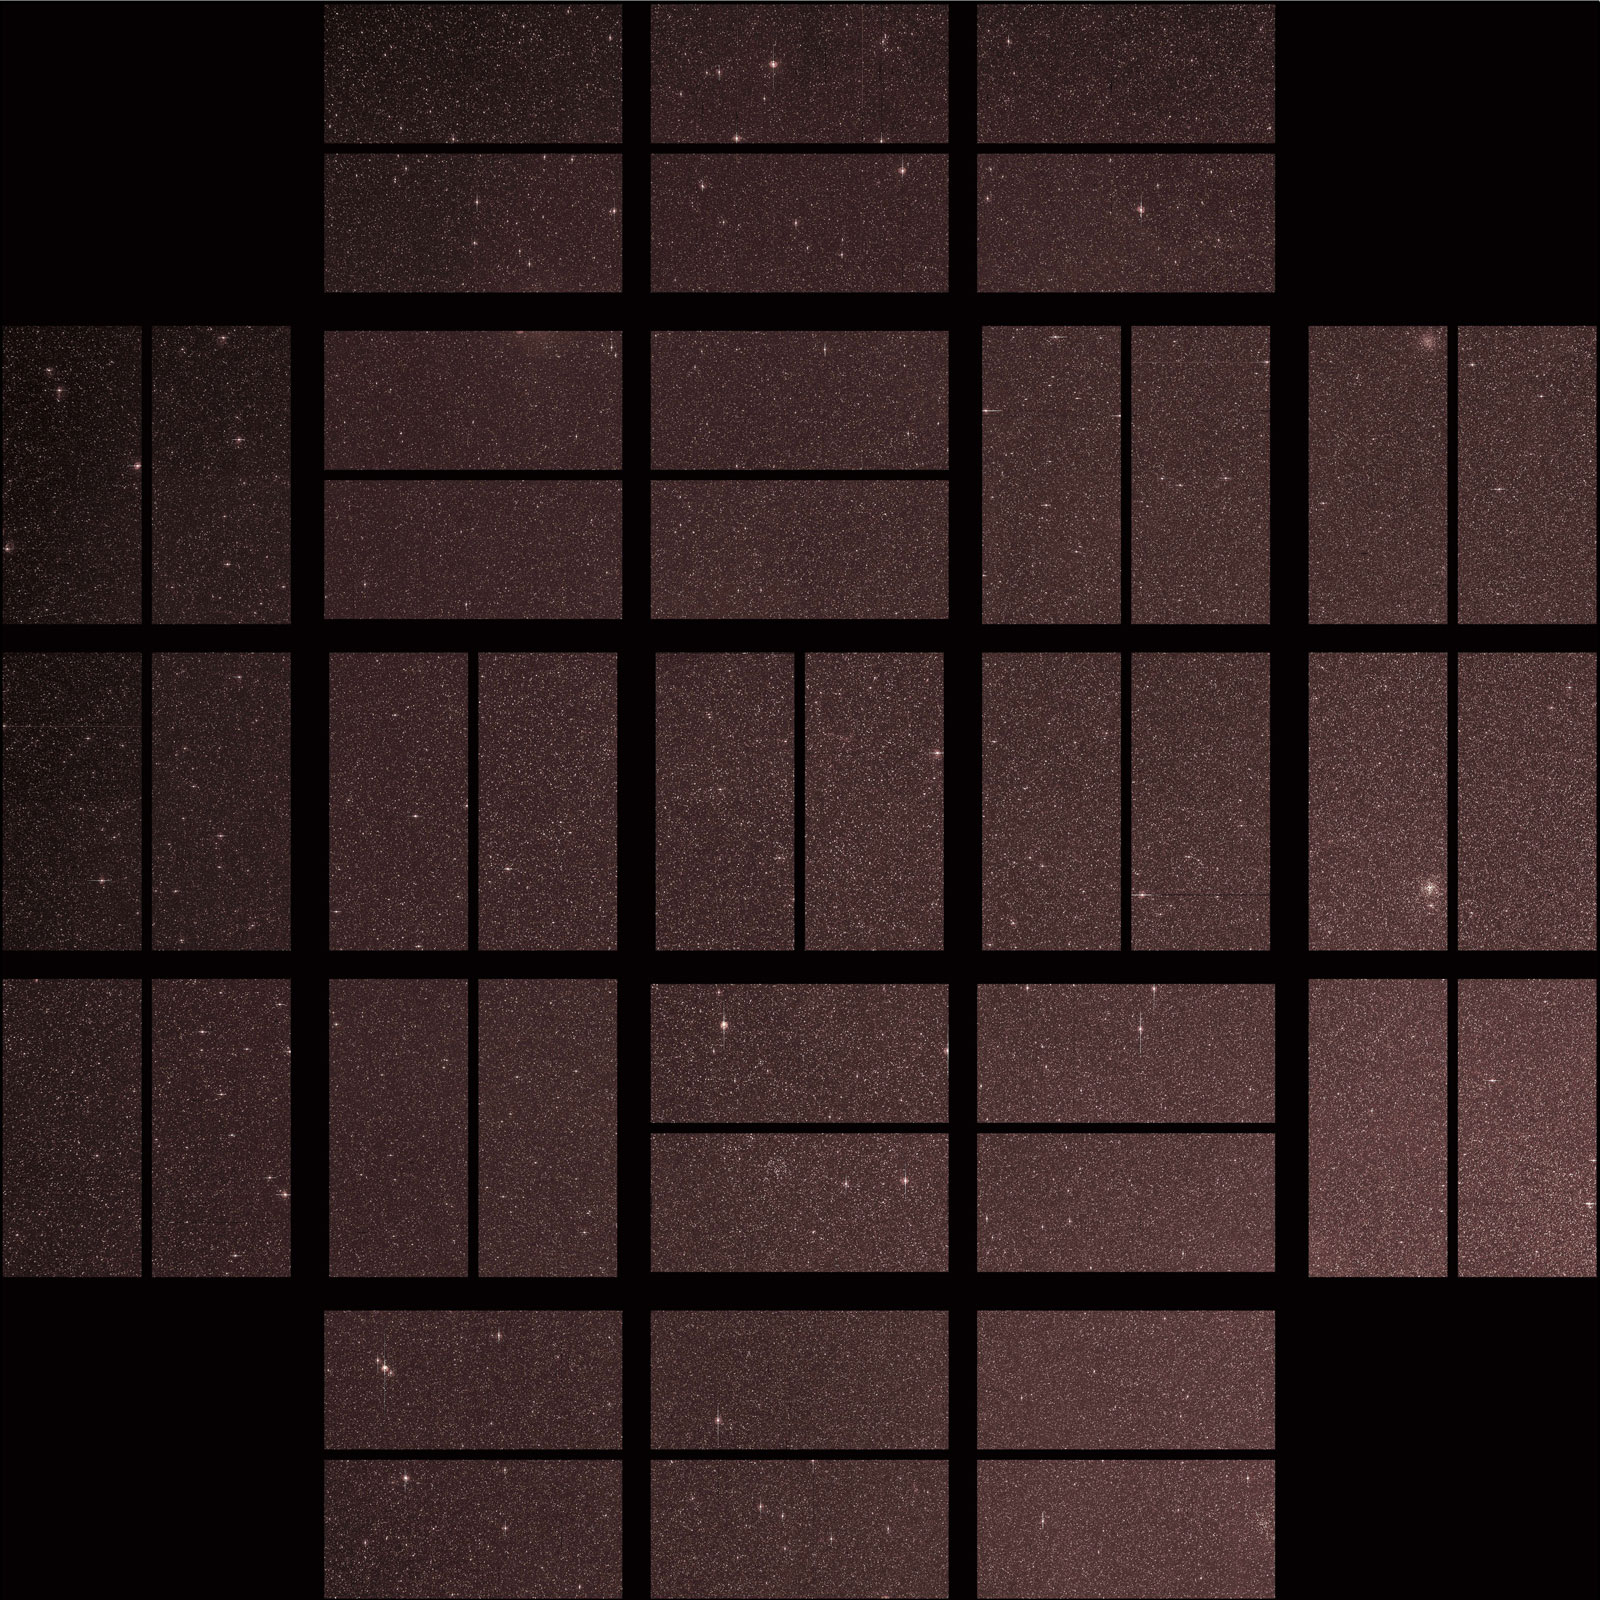 Grid view of distant stars